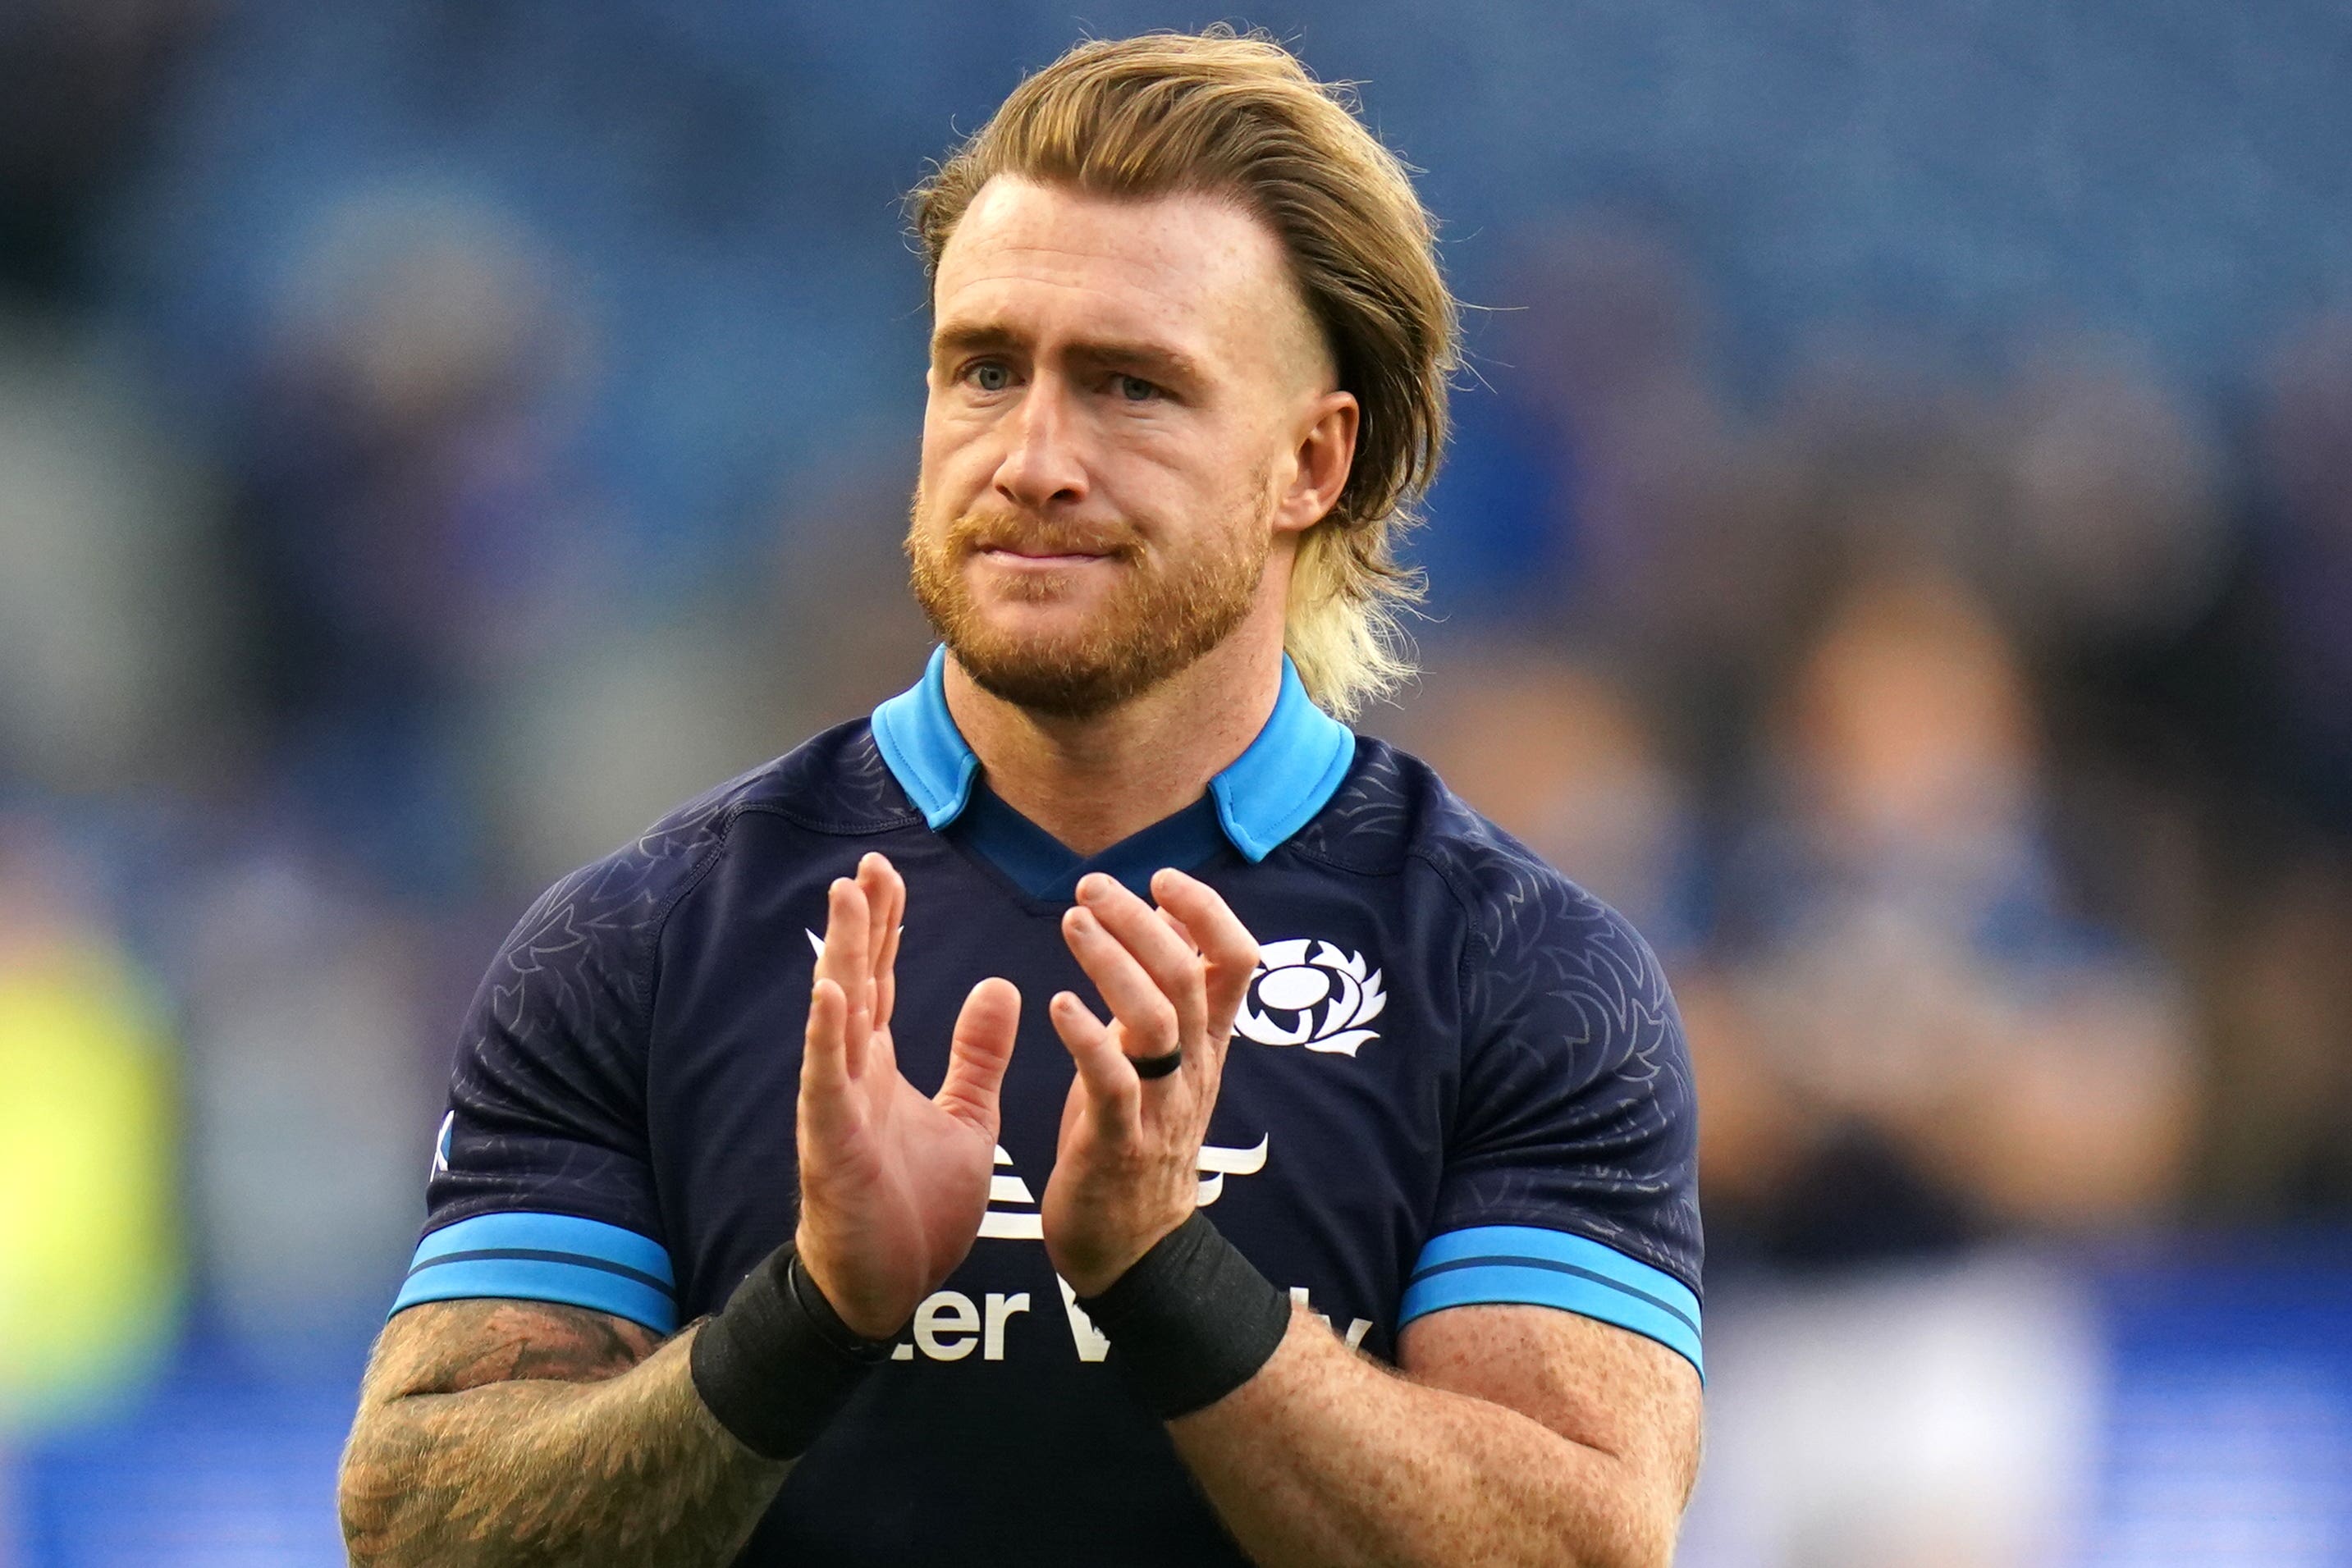 Stuart Hogg retired from rugby last year